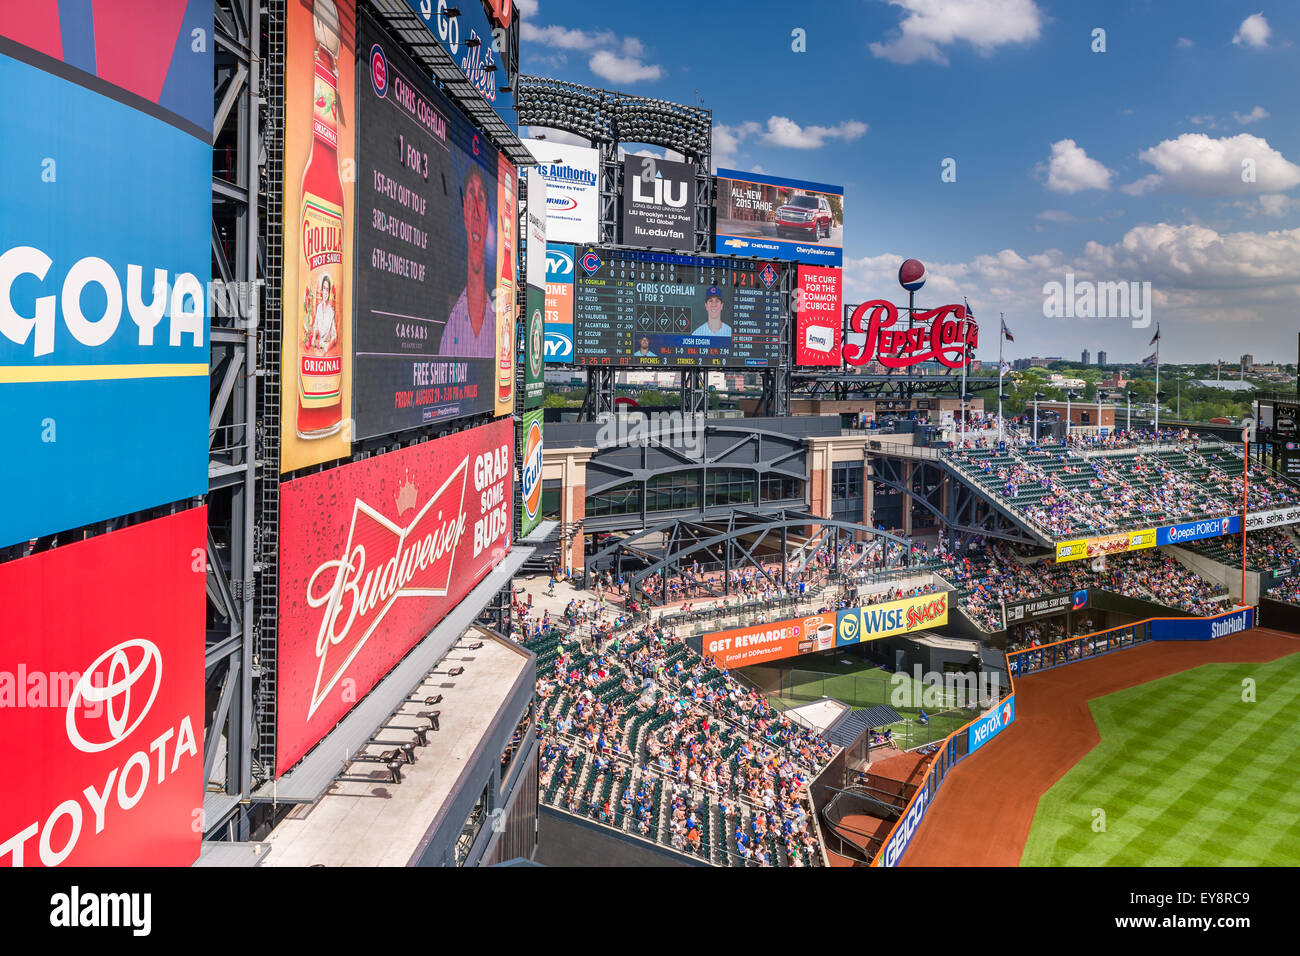 Spectators watch a game at the New York Mets  Citi Field Stadium, Queens, New York - USA. Stock Photo